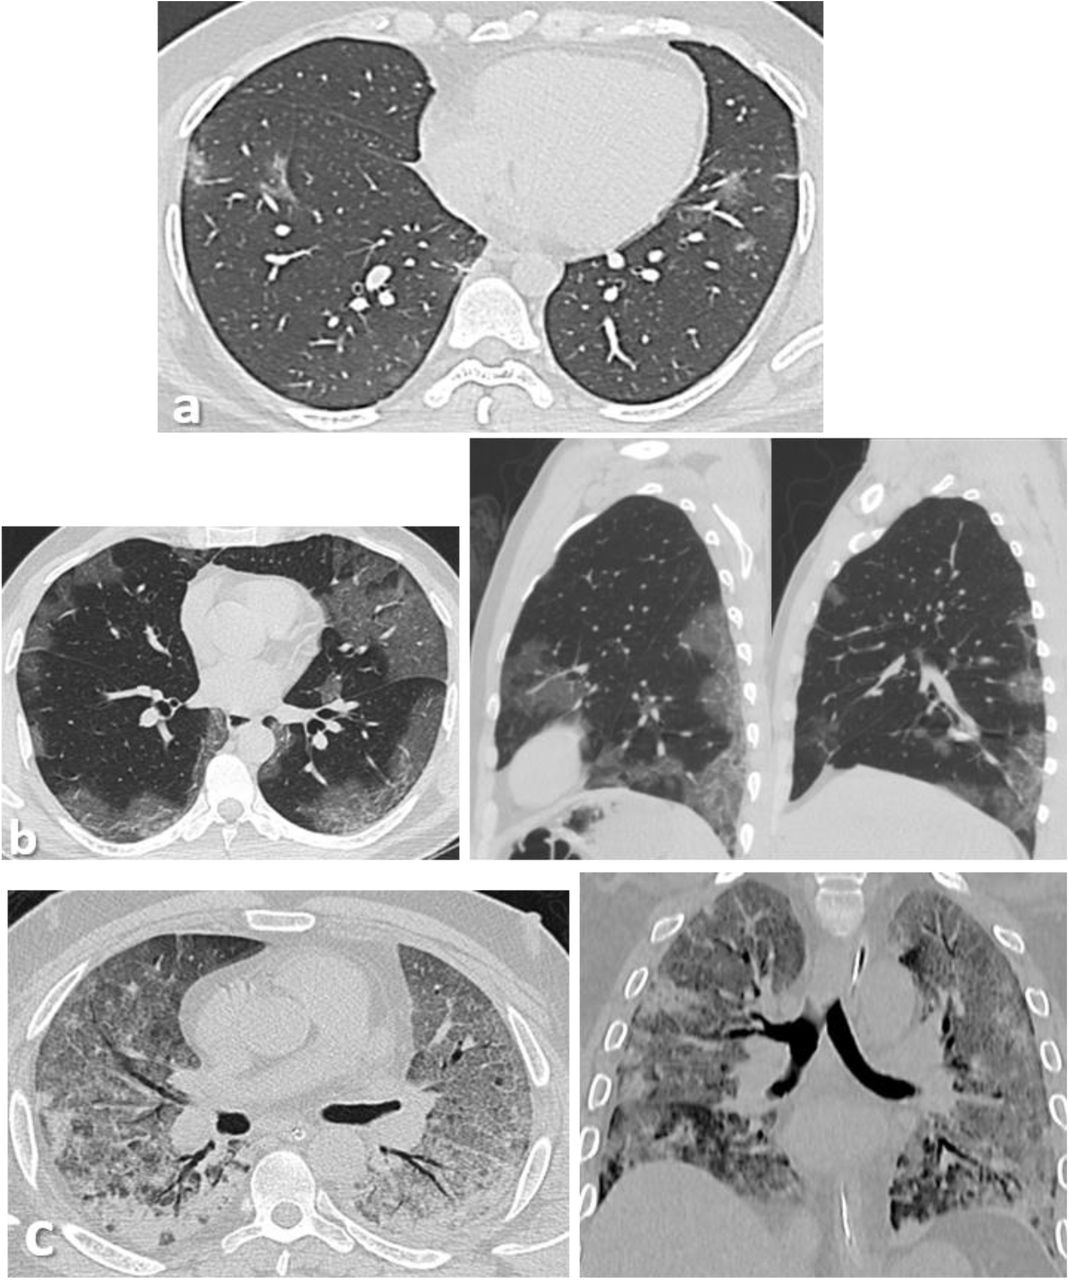 Correlation Between Chest Ct Severity Scores And The Clinical Parameters Of Adult Patients With Covid 19 Pneumonia Medrxiv